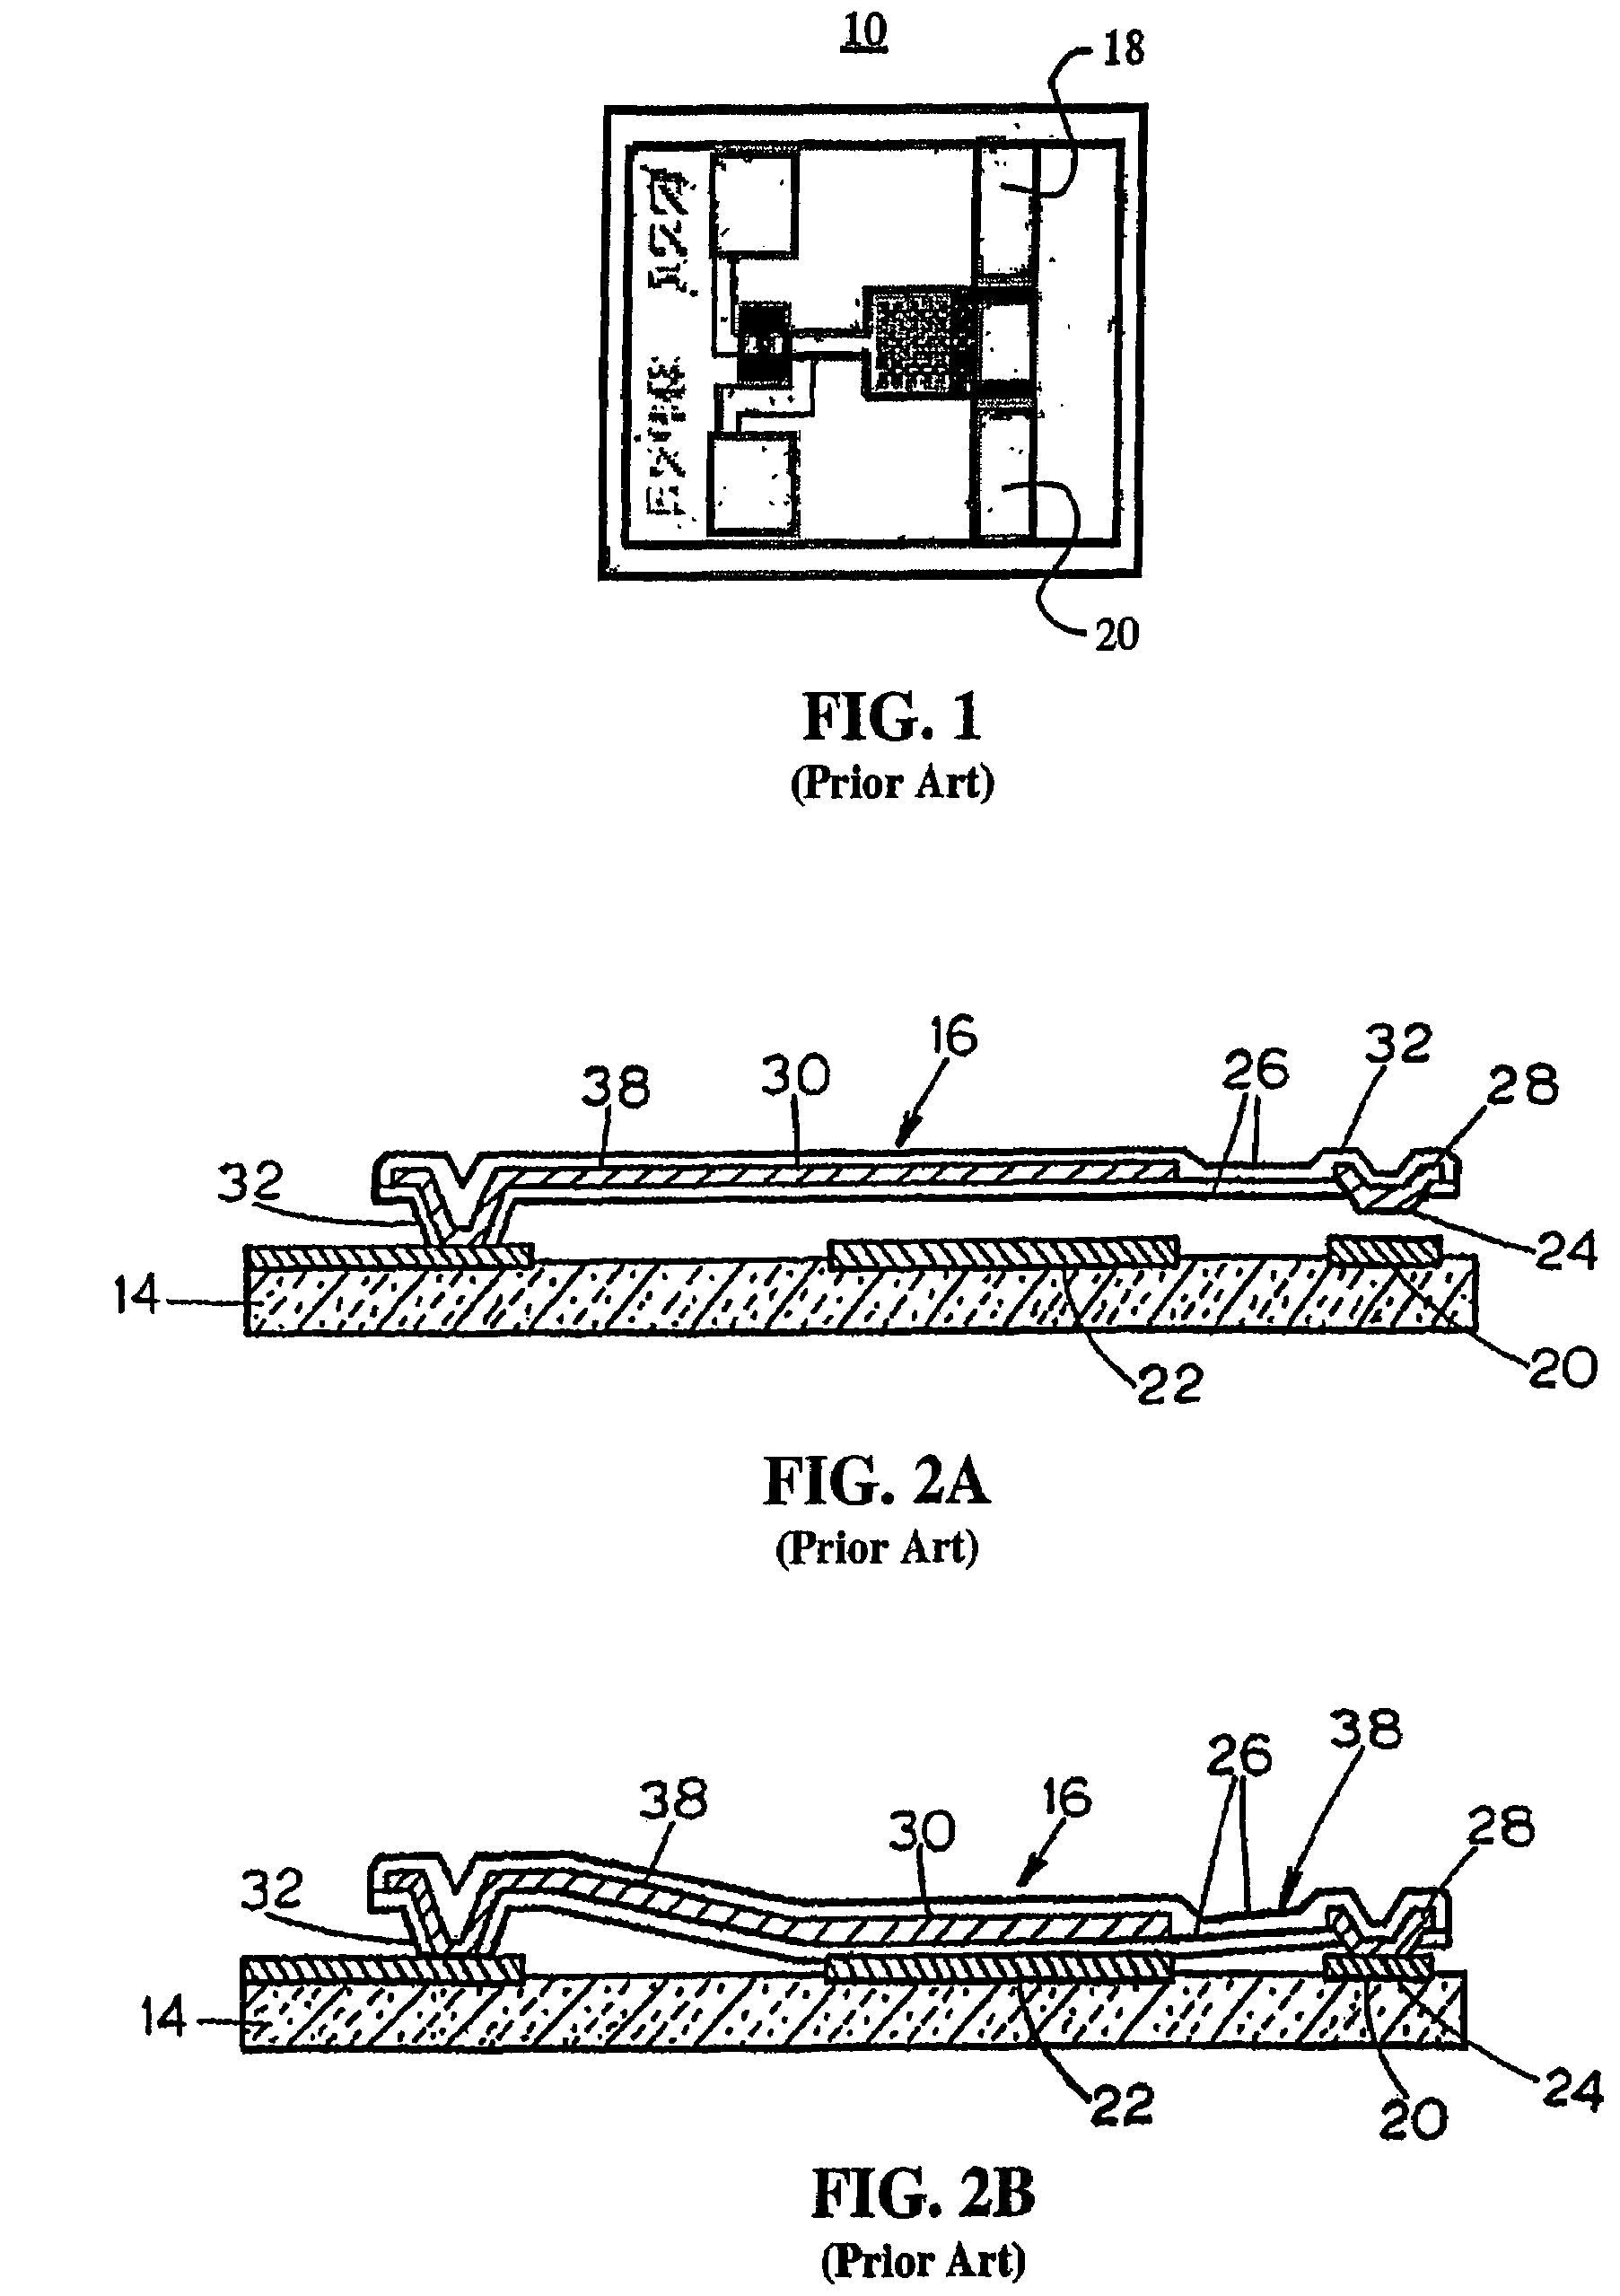 Method of fabricating an RF MEMS switch with spring-loaded latching mechanism